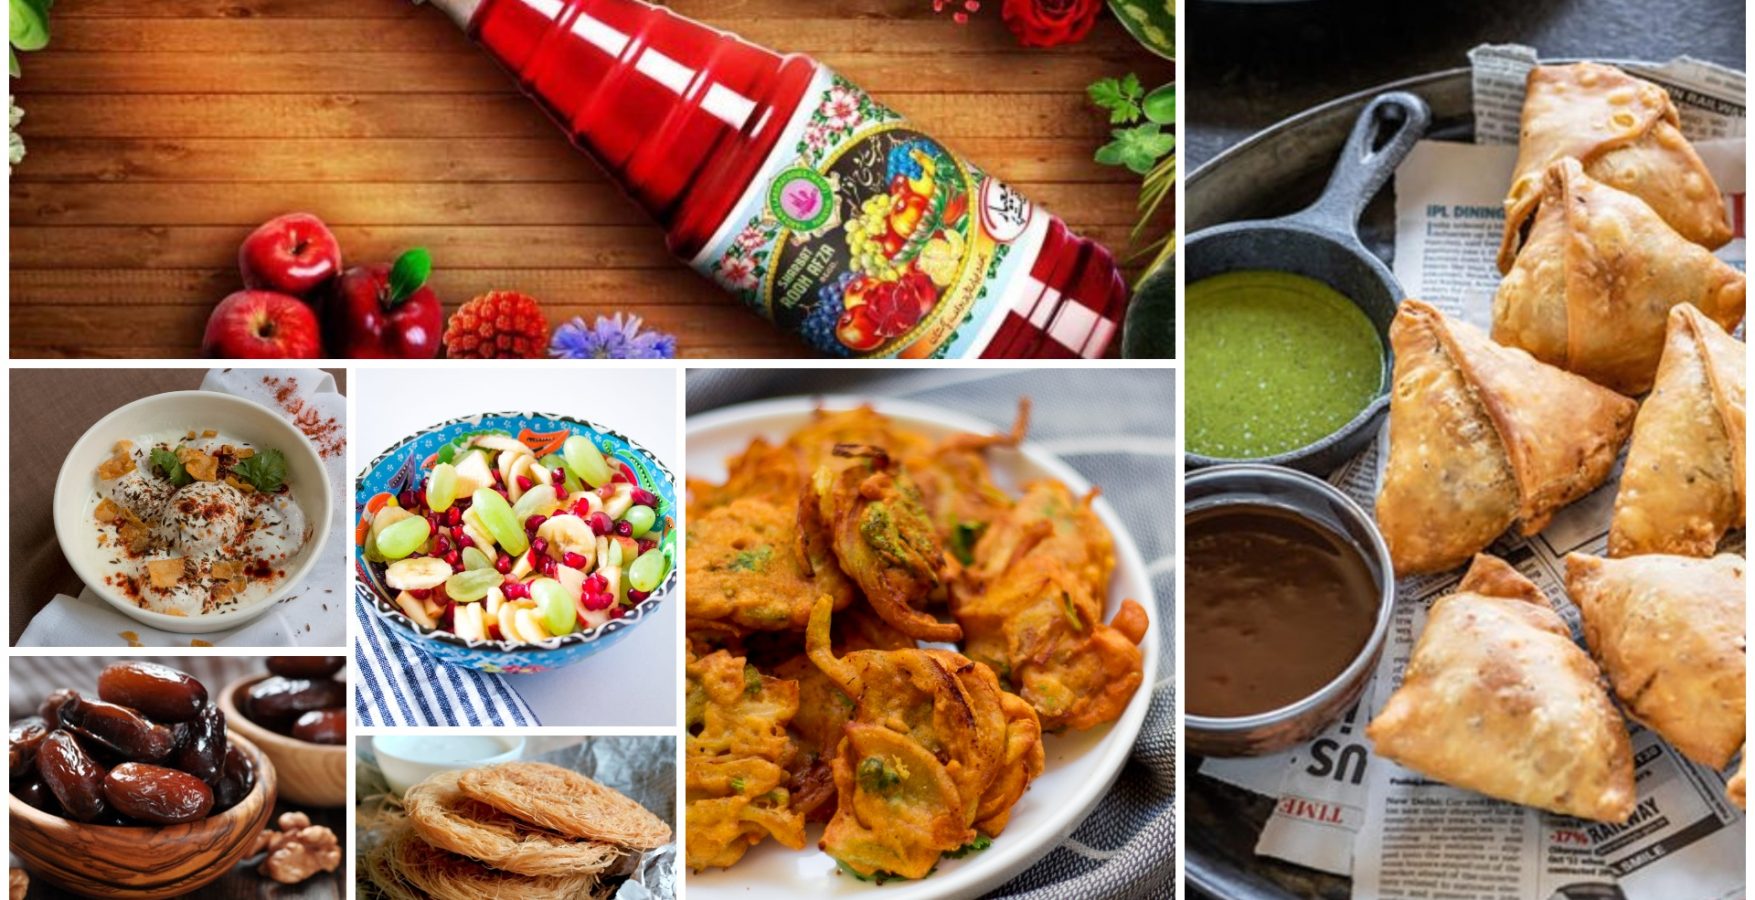 7 Food Items You Are Sure To Find On Your Menu in Ramadan - Diva Magazine